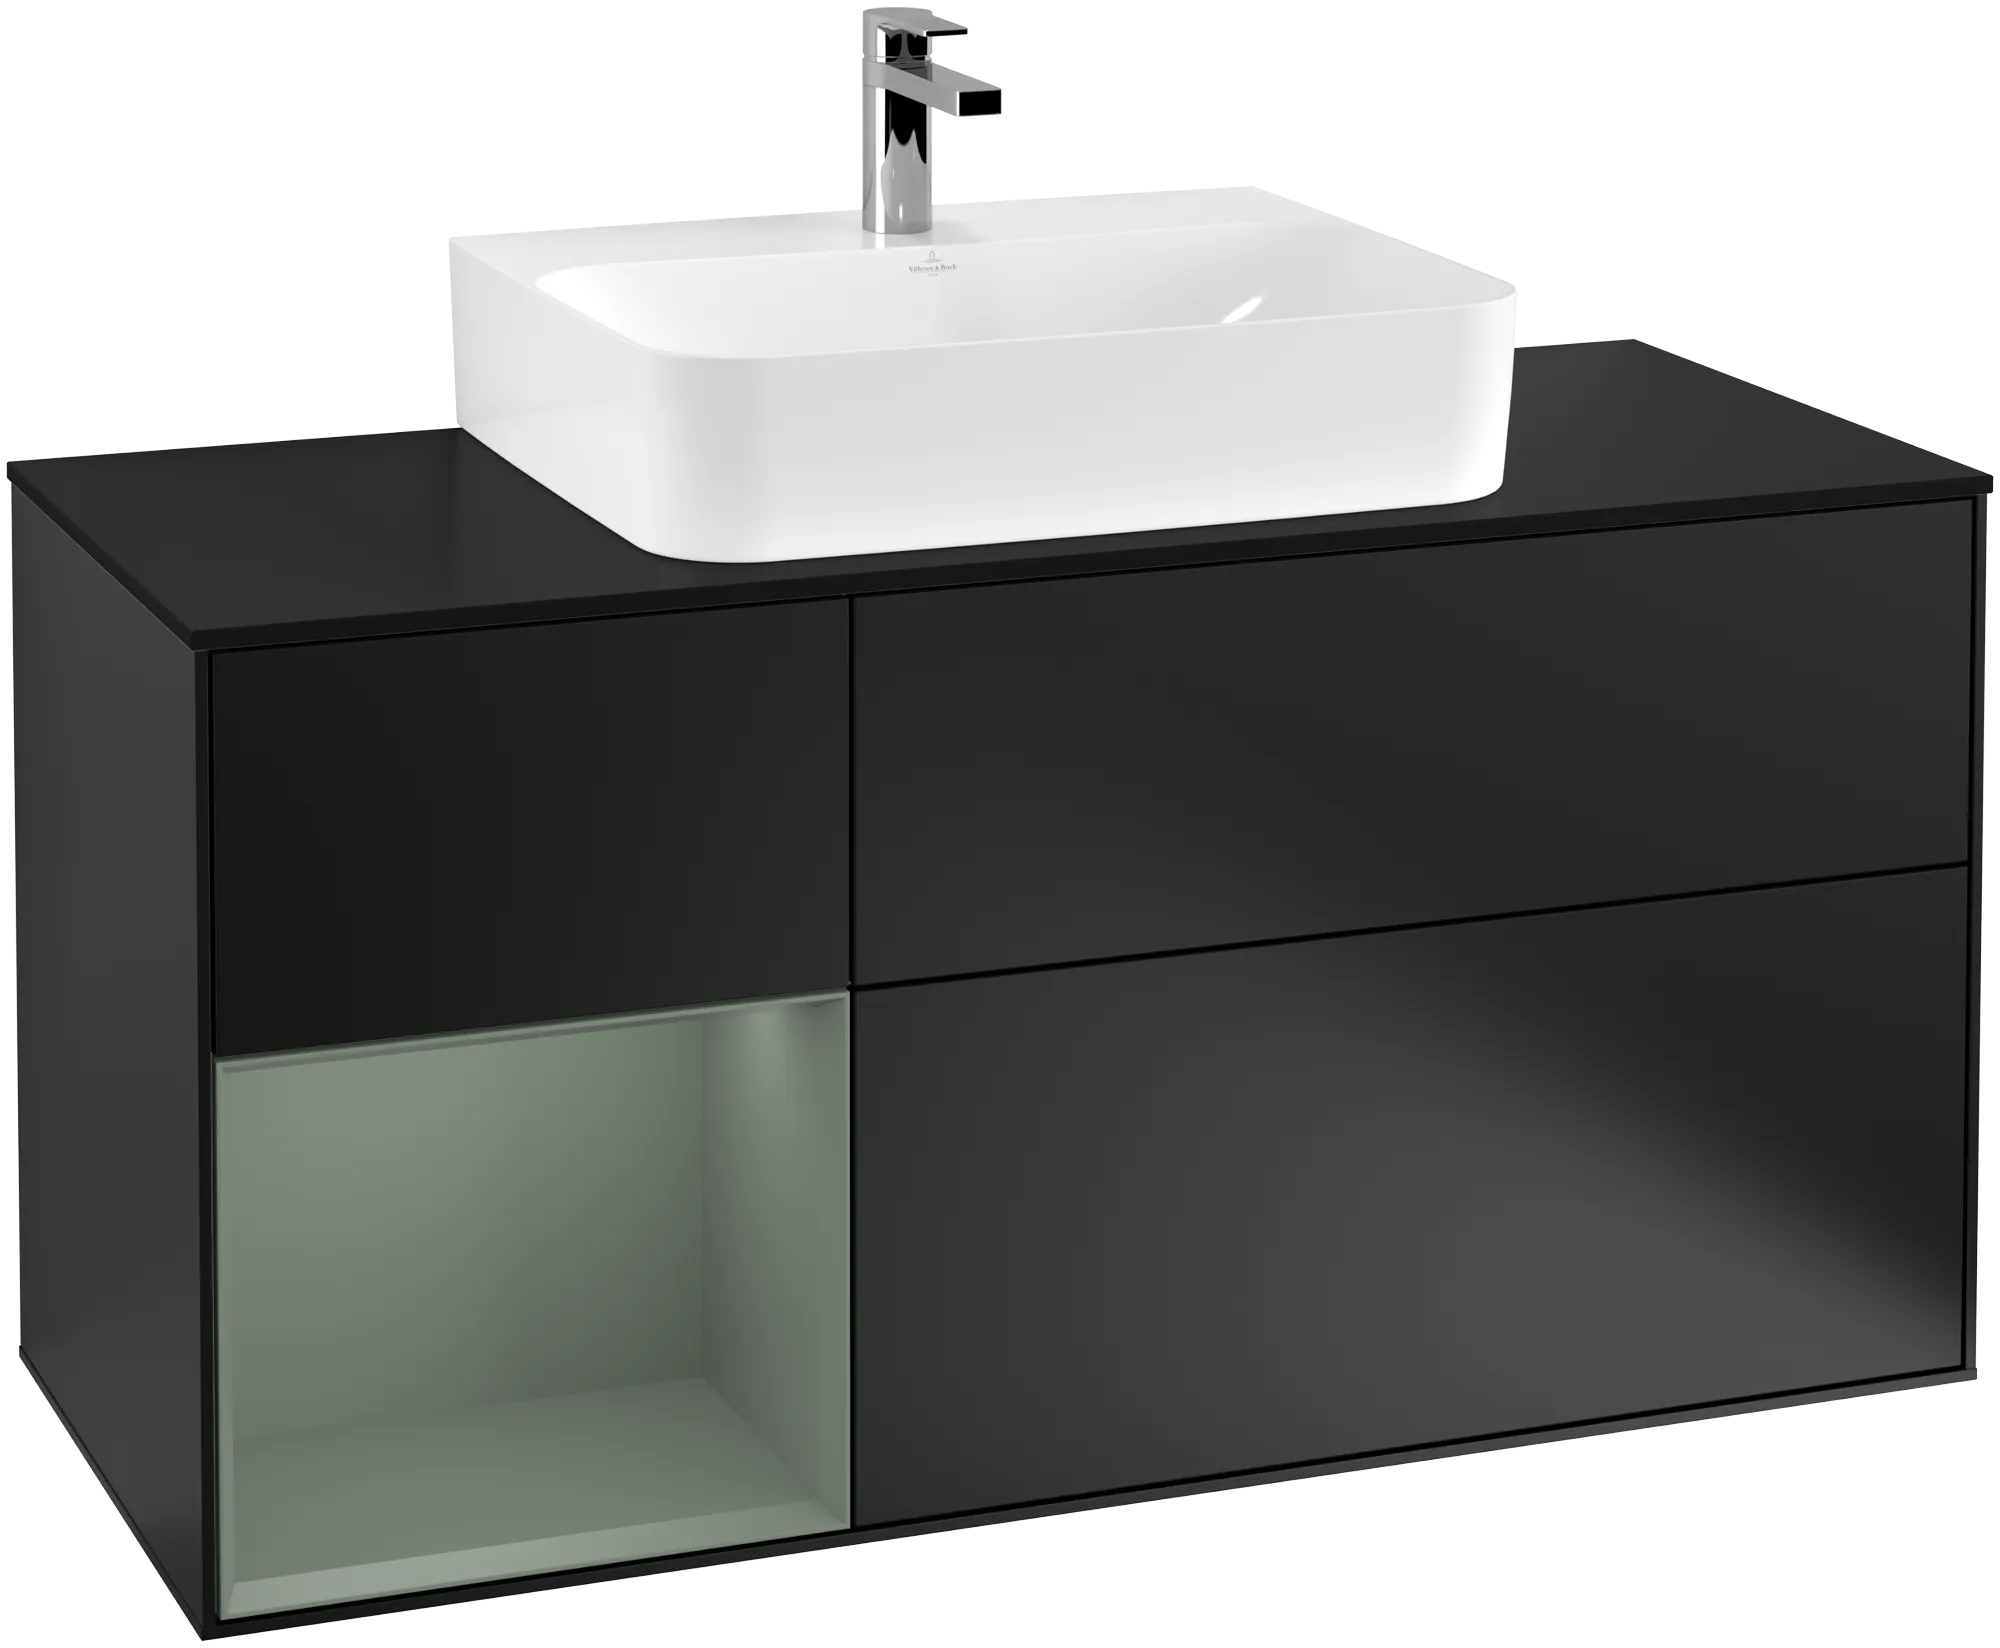 Picture of VILLEROY BOCH Finion Vanity unit, with lighting, 3 pull-out compartments, 1200 x 603 x 501 mm, Black Matt Lacquer / Olive Matt Lacquer / Glass Black Matt #G162GMPD